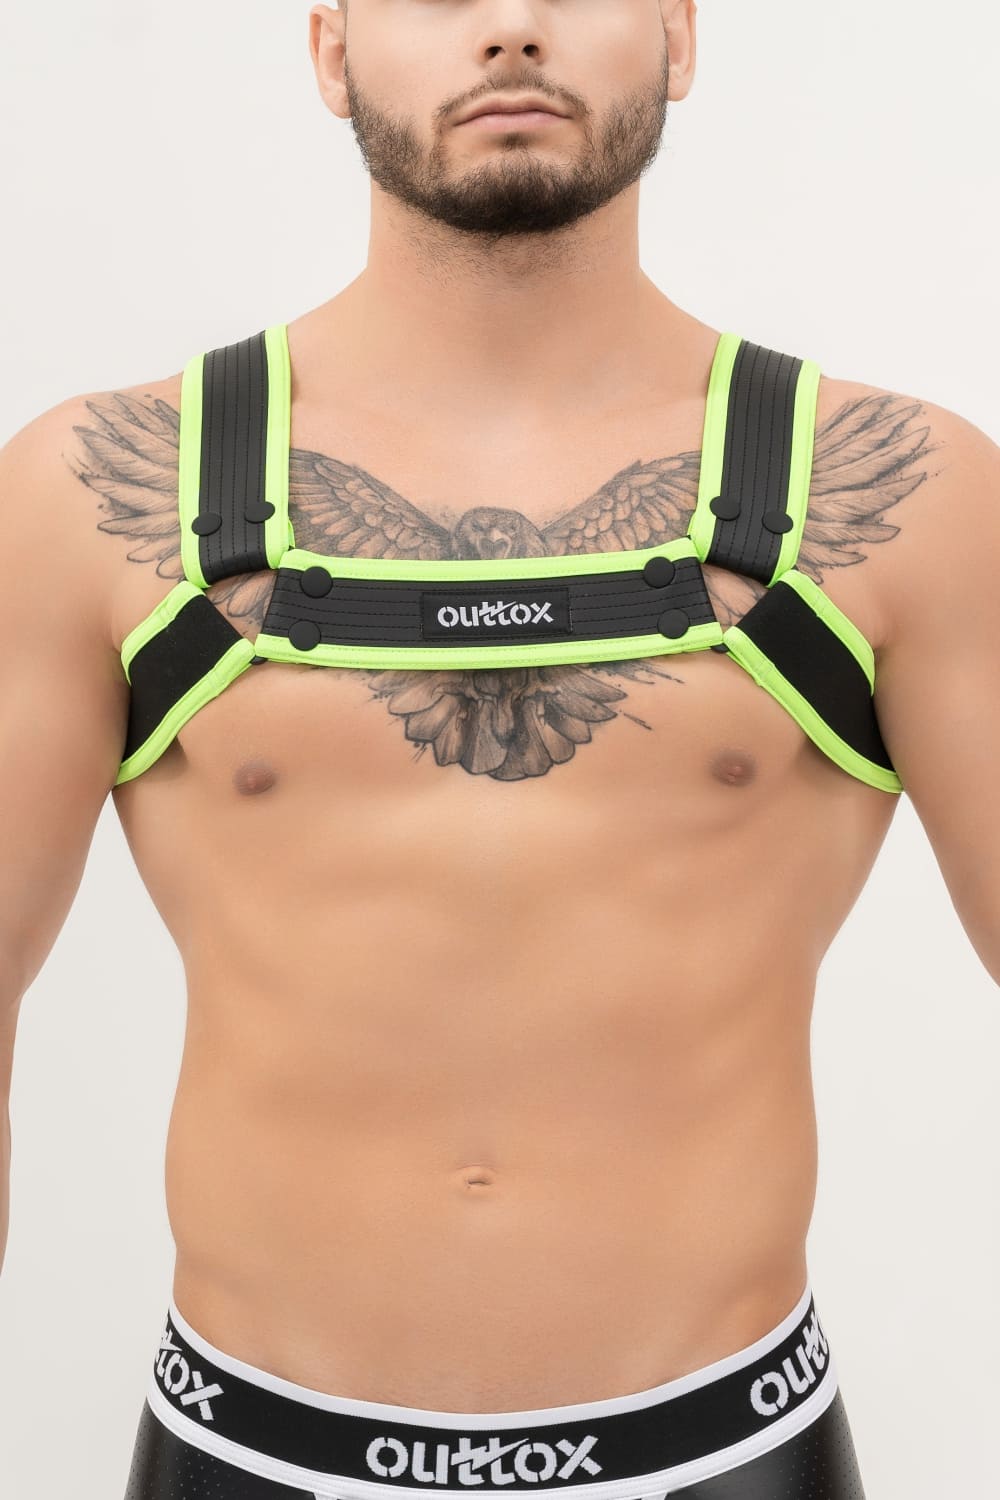 Outtox. Bulldog Harness with Snaps. Black+Green 'Neon'